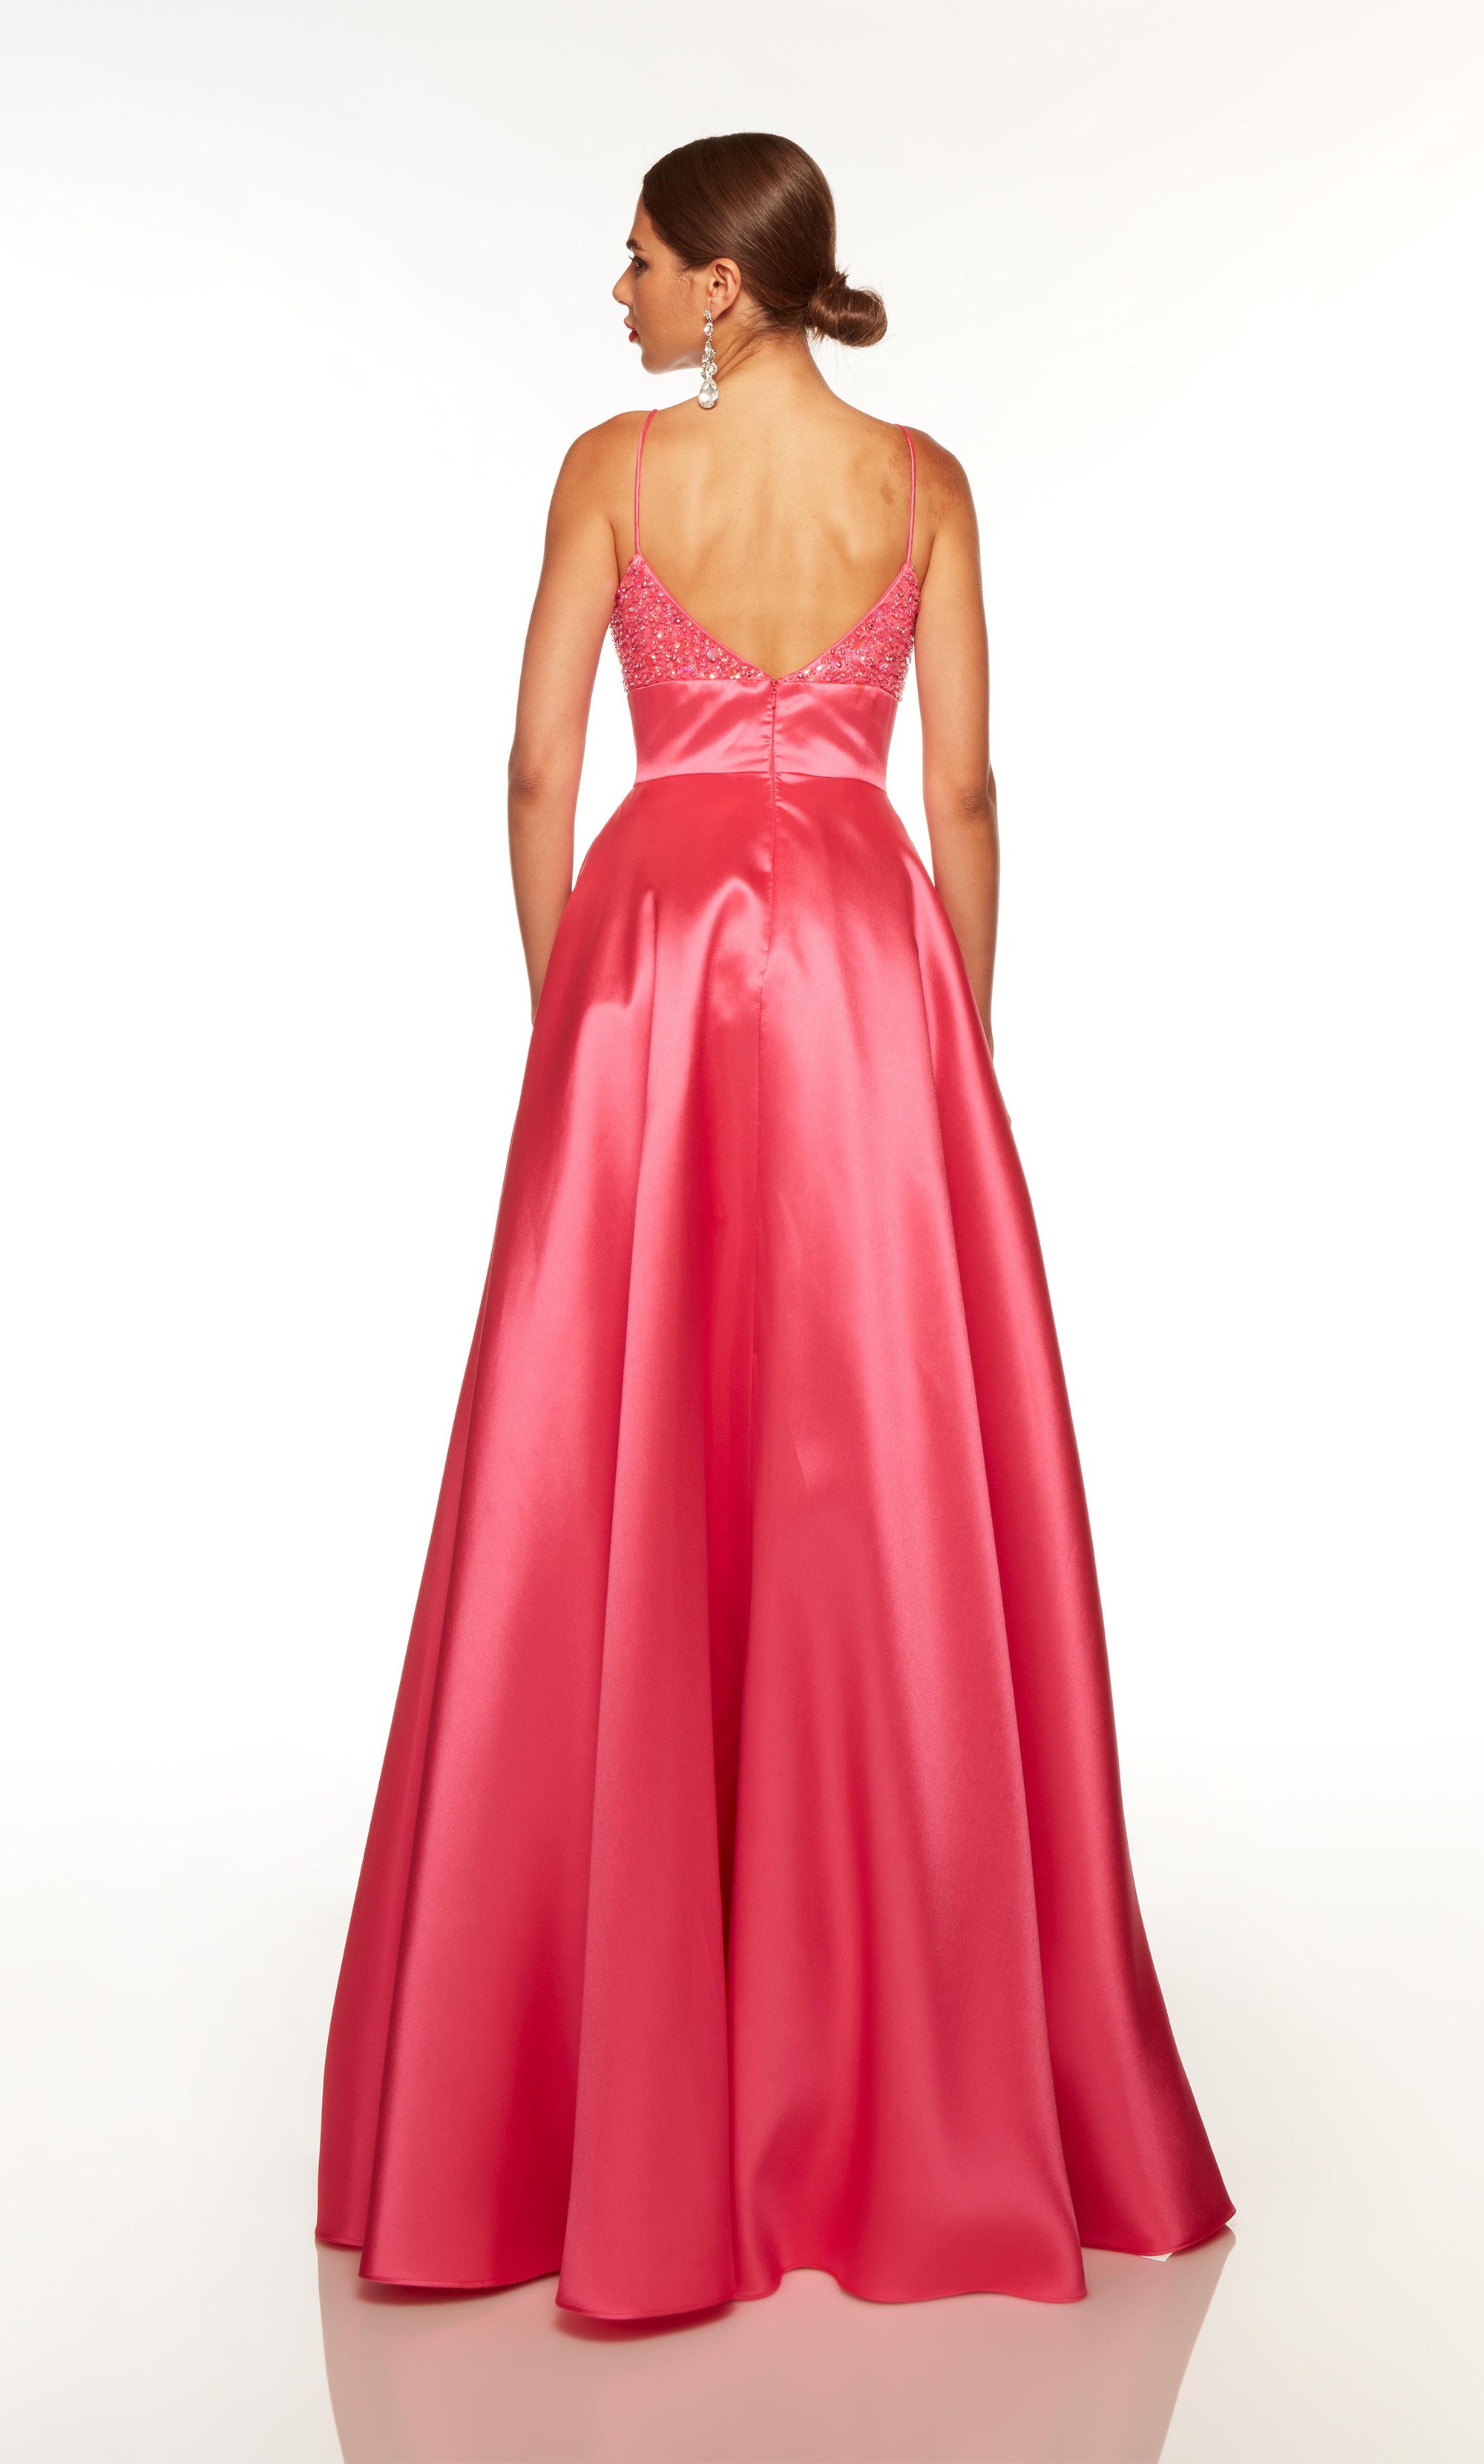 Long hot pink prom dress with a sweetheart neckline, beaded bodice, and pockets. COLOR-SWATCH_1763__HOT-PINK